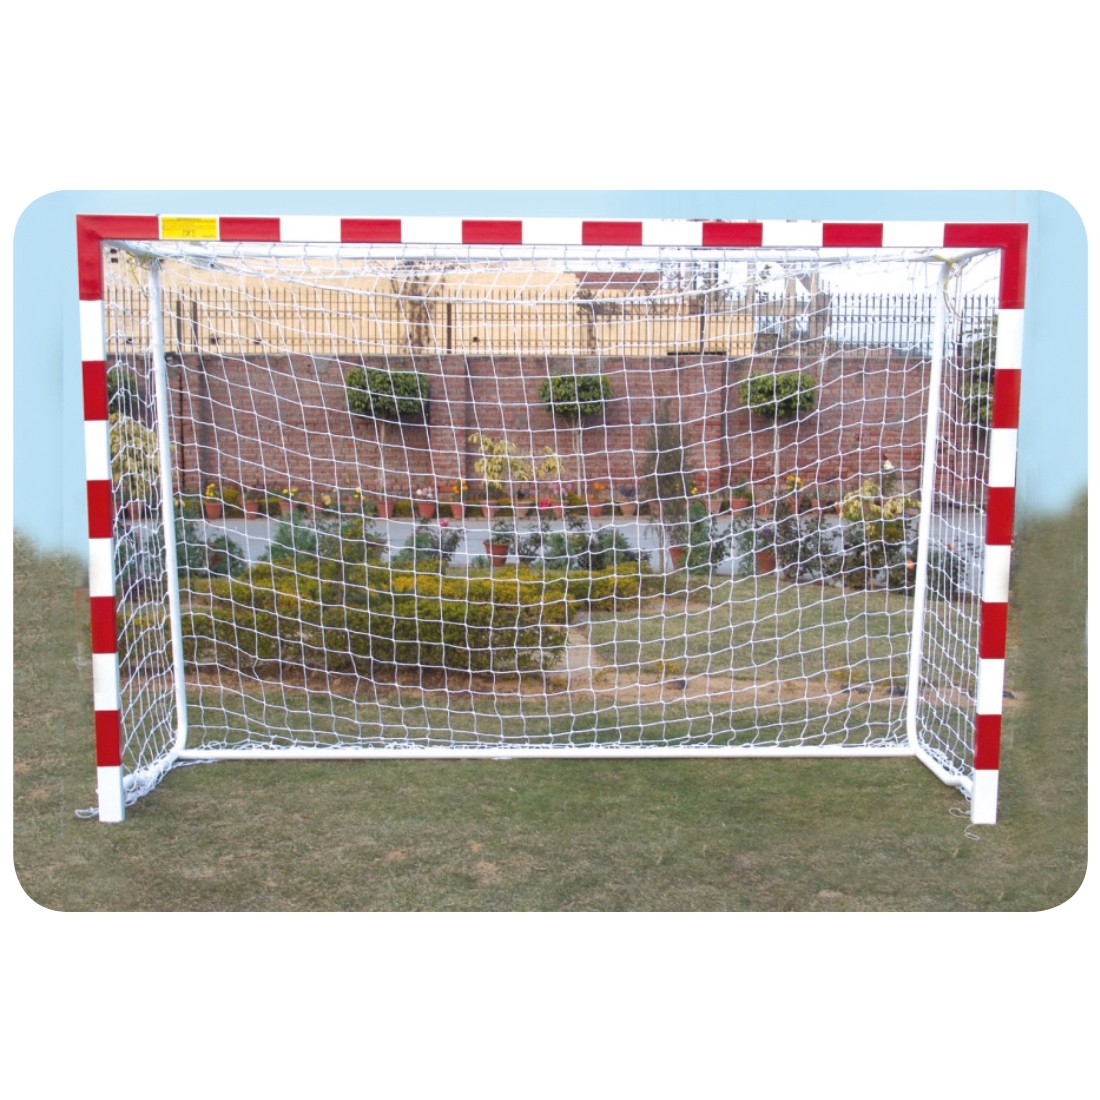 HANDBALL GOAL POST STEEL WITH 40MM BACK SUPPORT